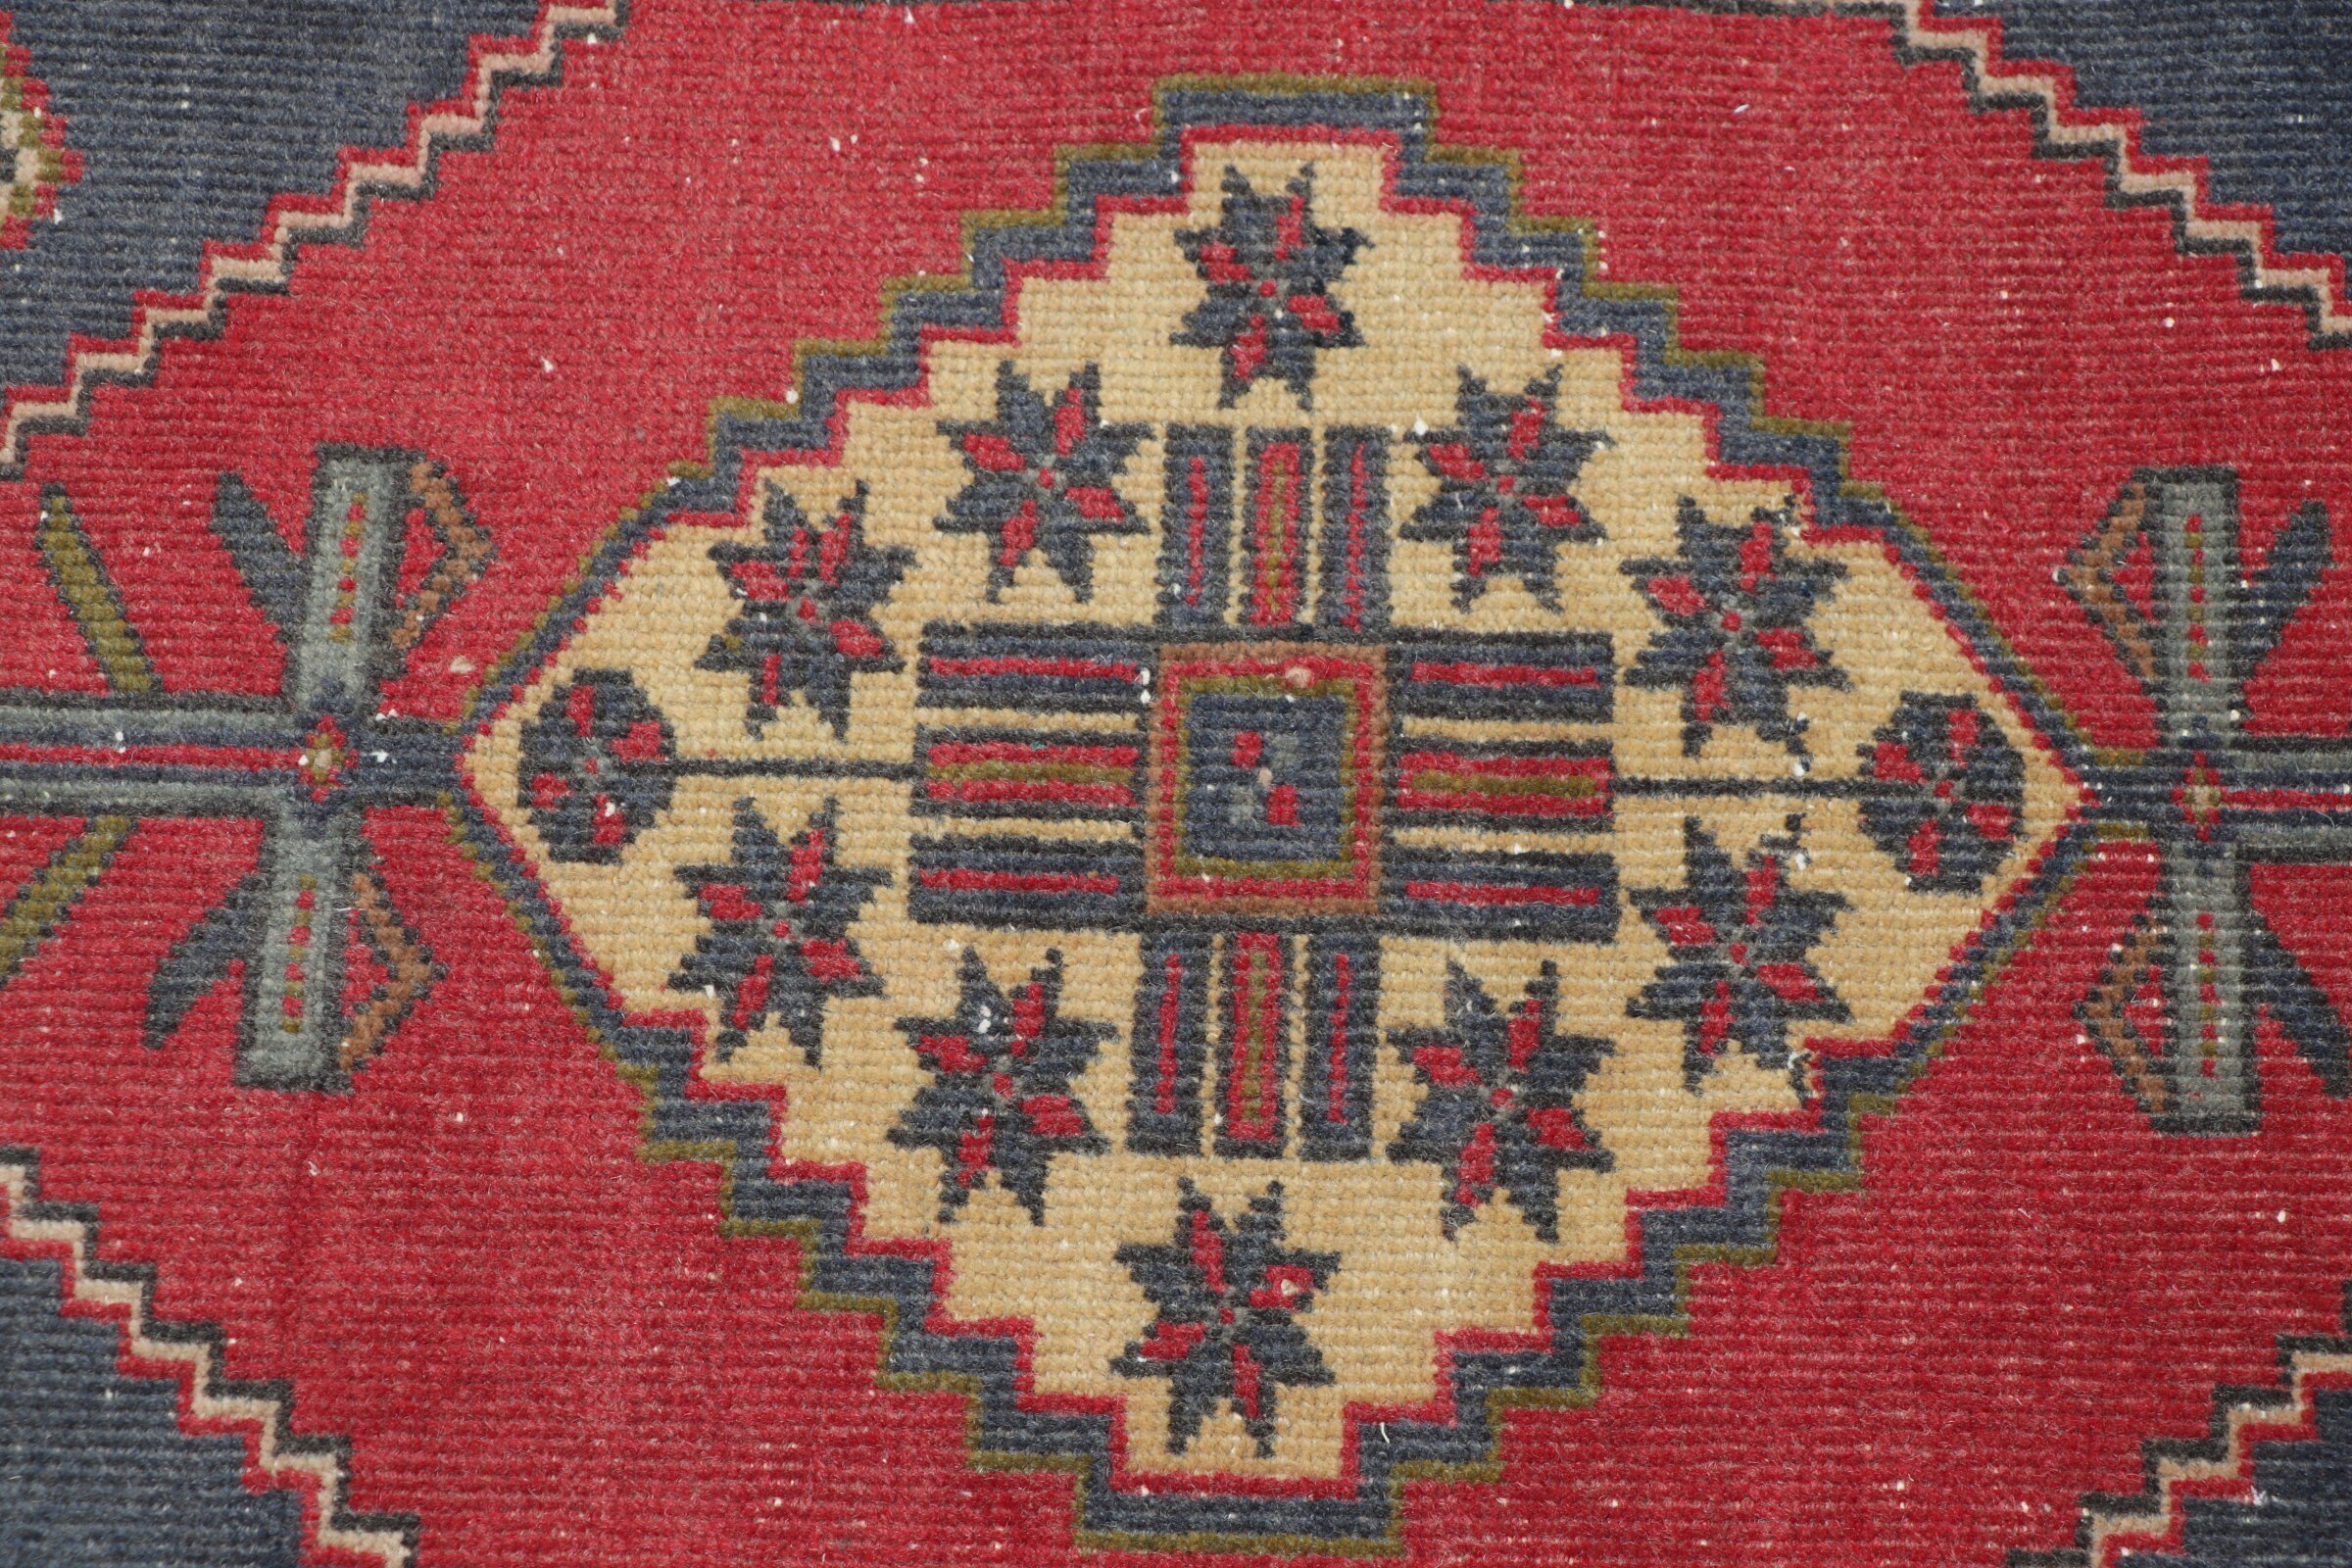 Bath Rug, Anatolian Rugs, Eclectic Rug, Red  1.5x2.7 ft Small Rug, Turkish Rugs, Vintage Rugs, Car Mat Rug